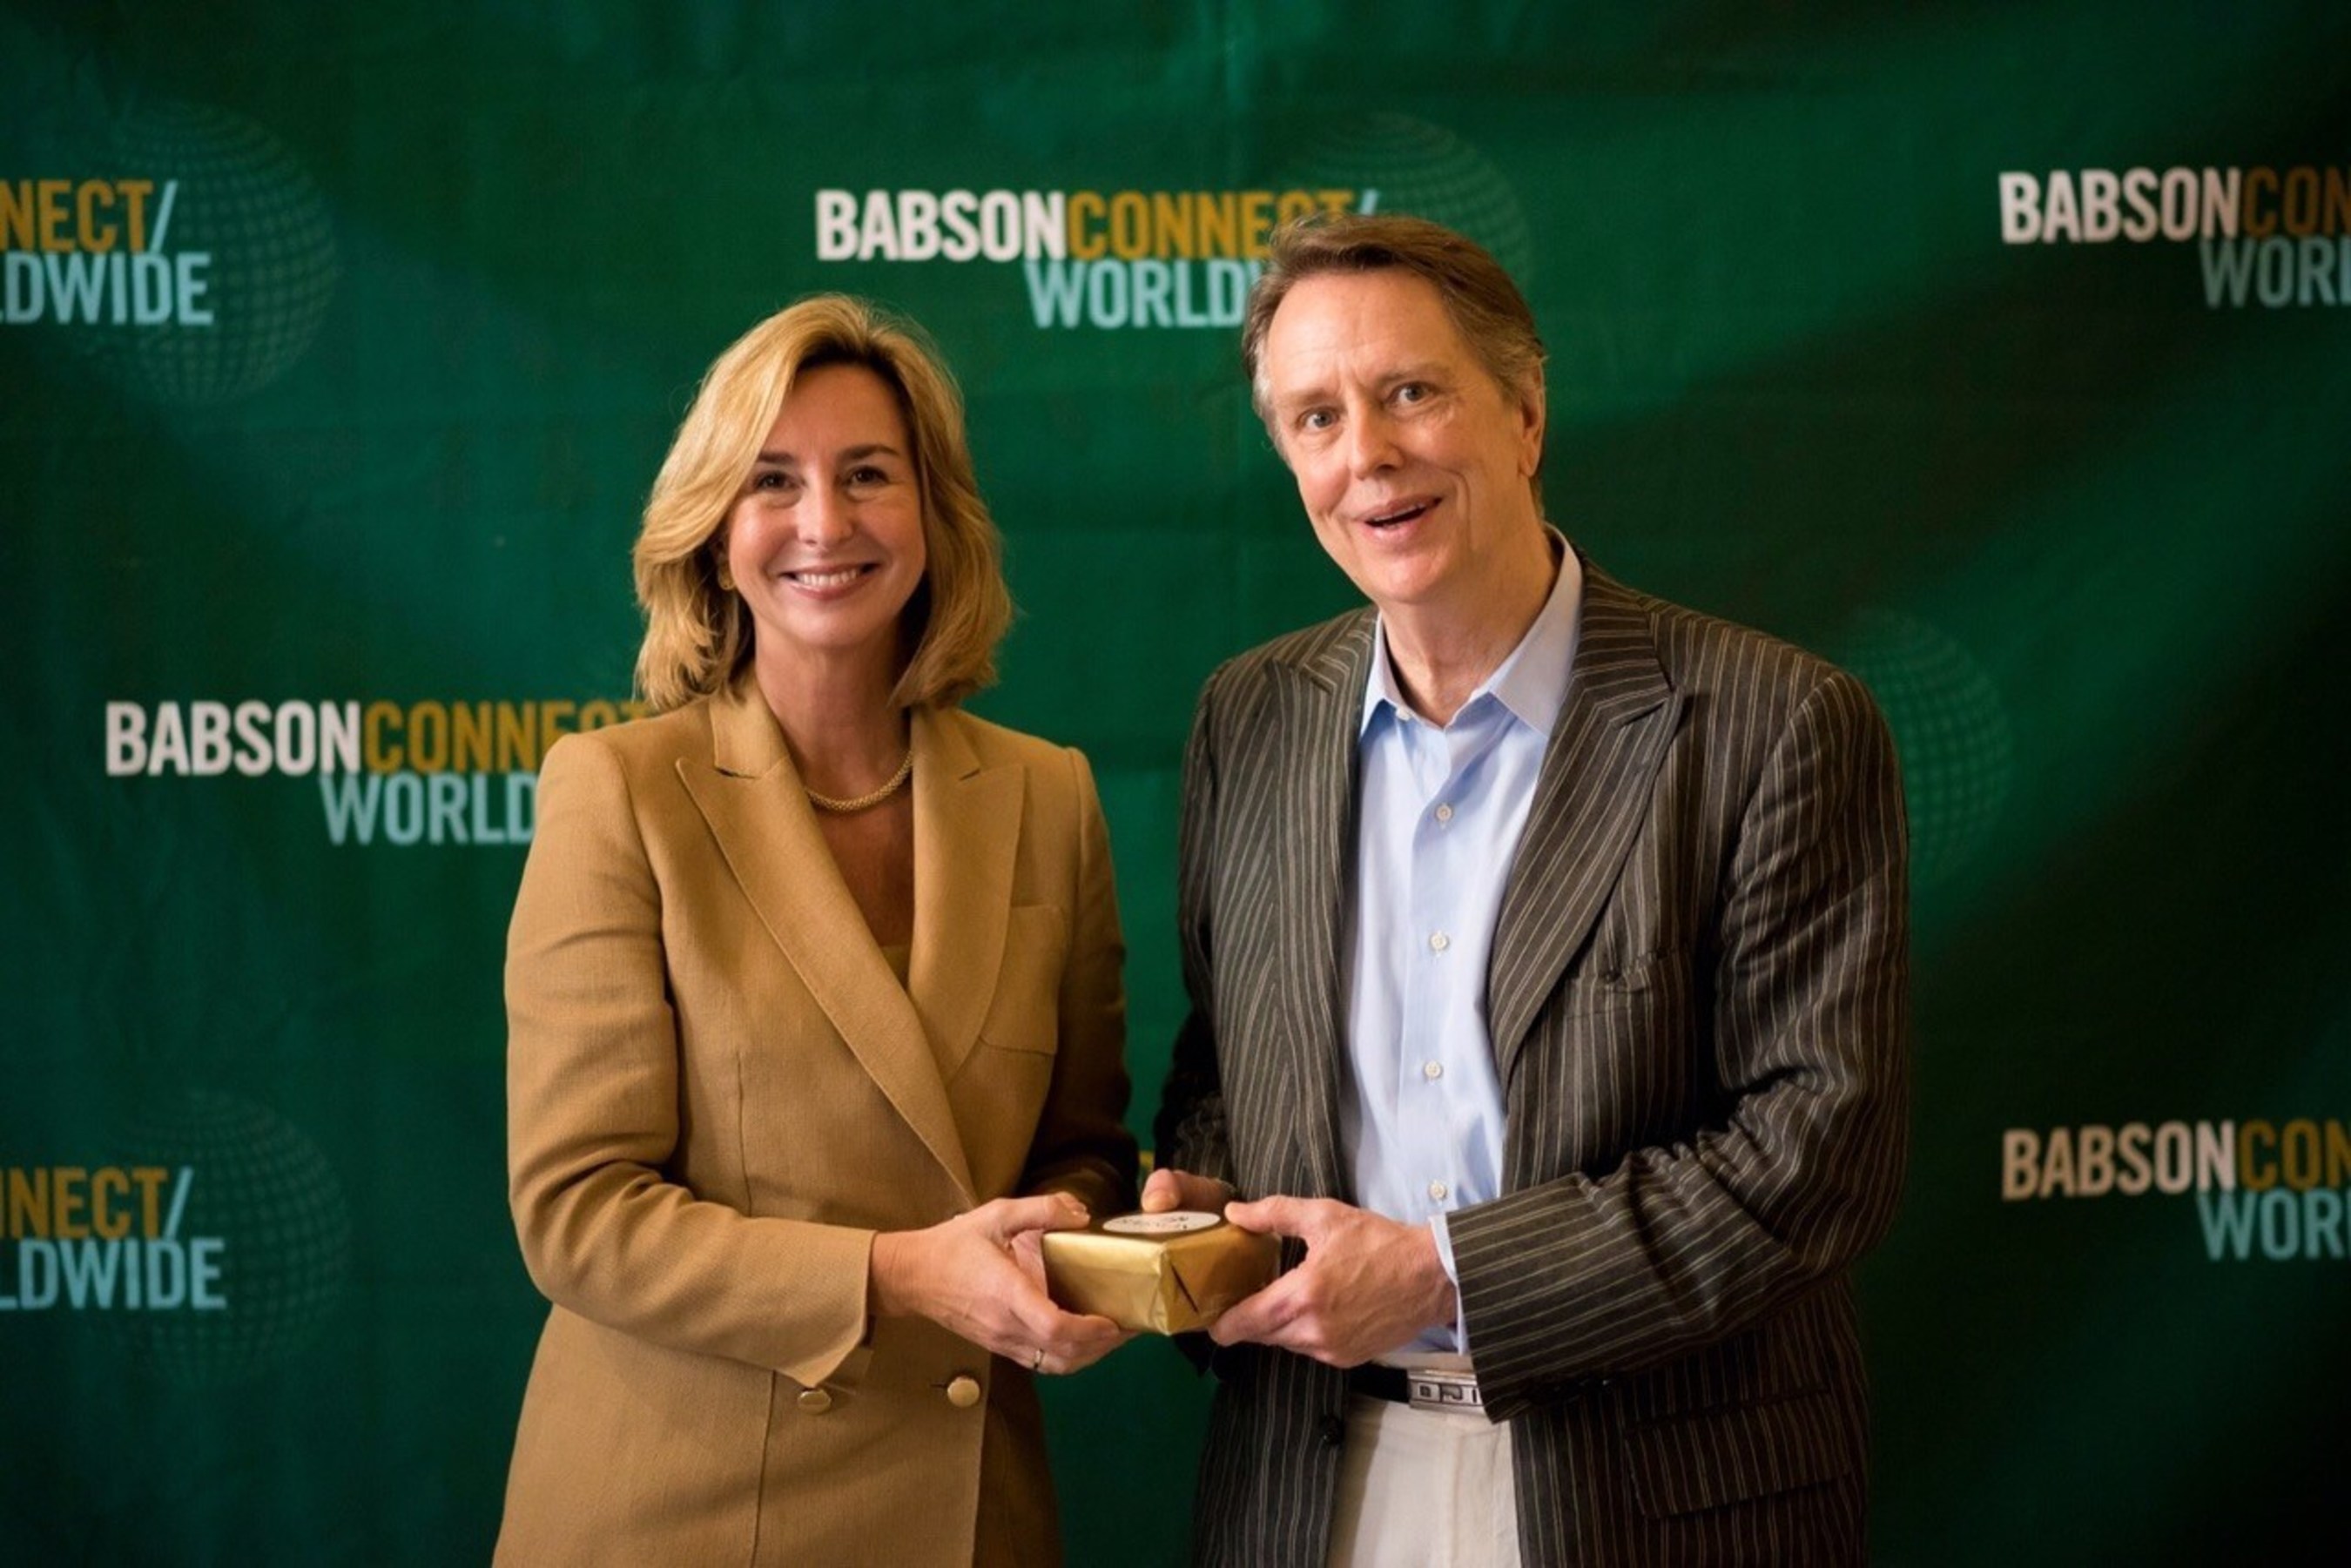 Babson College establishes new, endowed distinguished professorship - Steven C. and Carmella R. Kletjian Foundation Distinguished Professor in Global Surgery - with $3 million gift by Steven C. and Carmella R. Kletjian Foundation. Donald Hannan III (right), Director of the Kletjian Foundation, joined Babson President Kerry Healey (left) at ceremony to formally establish the new distinguished professorship.